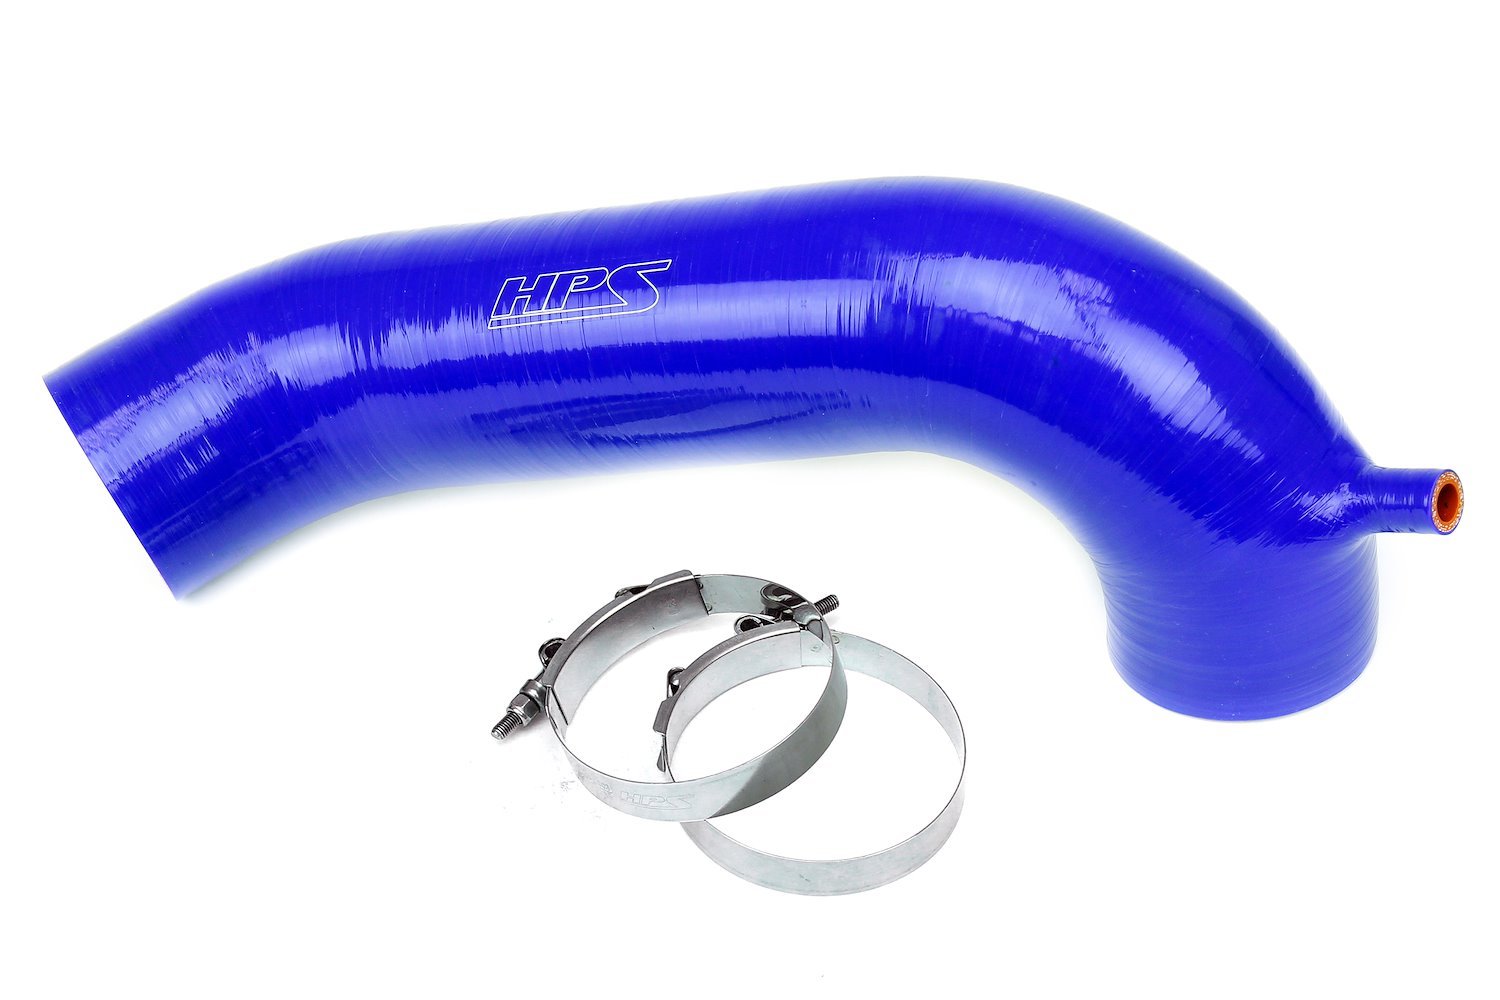 57-1867-BLUE Silicone Air Intake Kit, Replace Damaged Or Restrictive Stock Air Intake, Improve Throttle Response